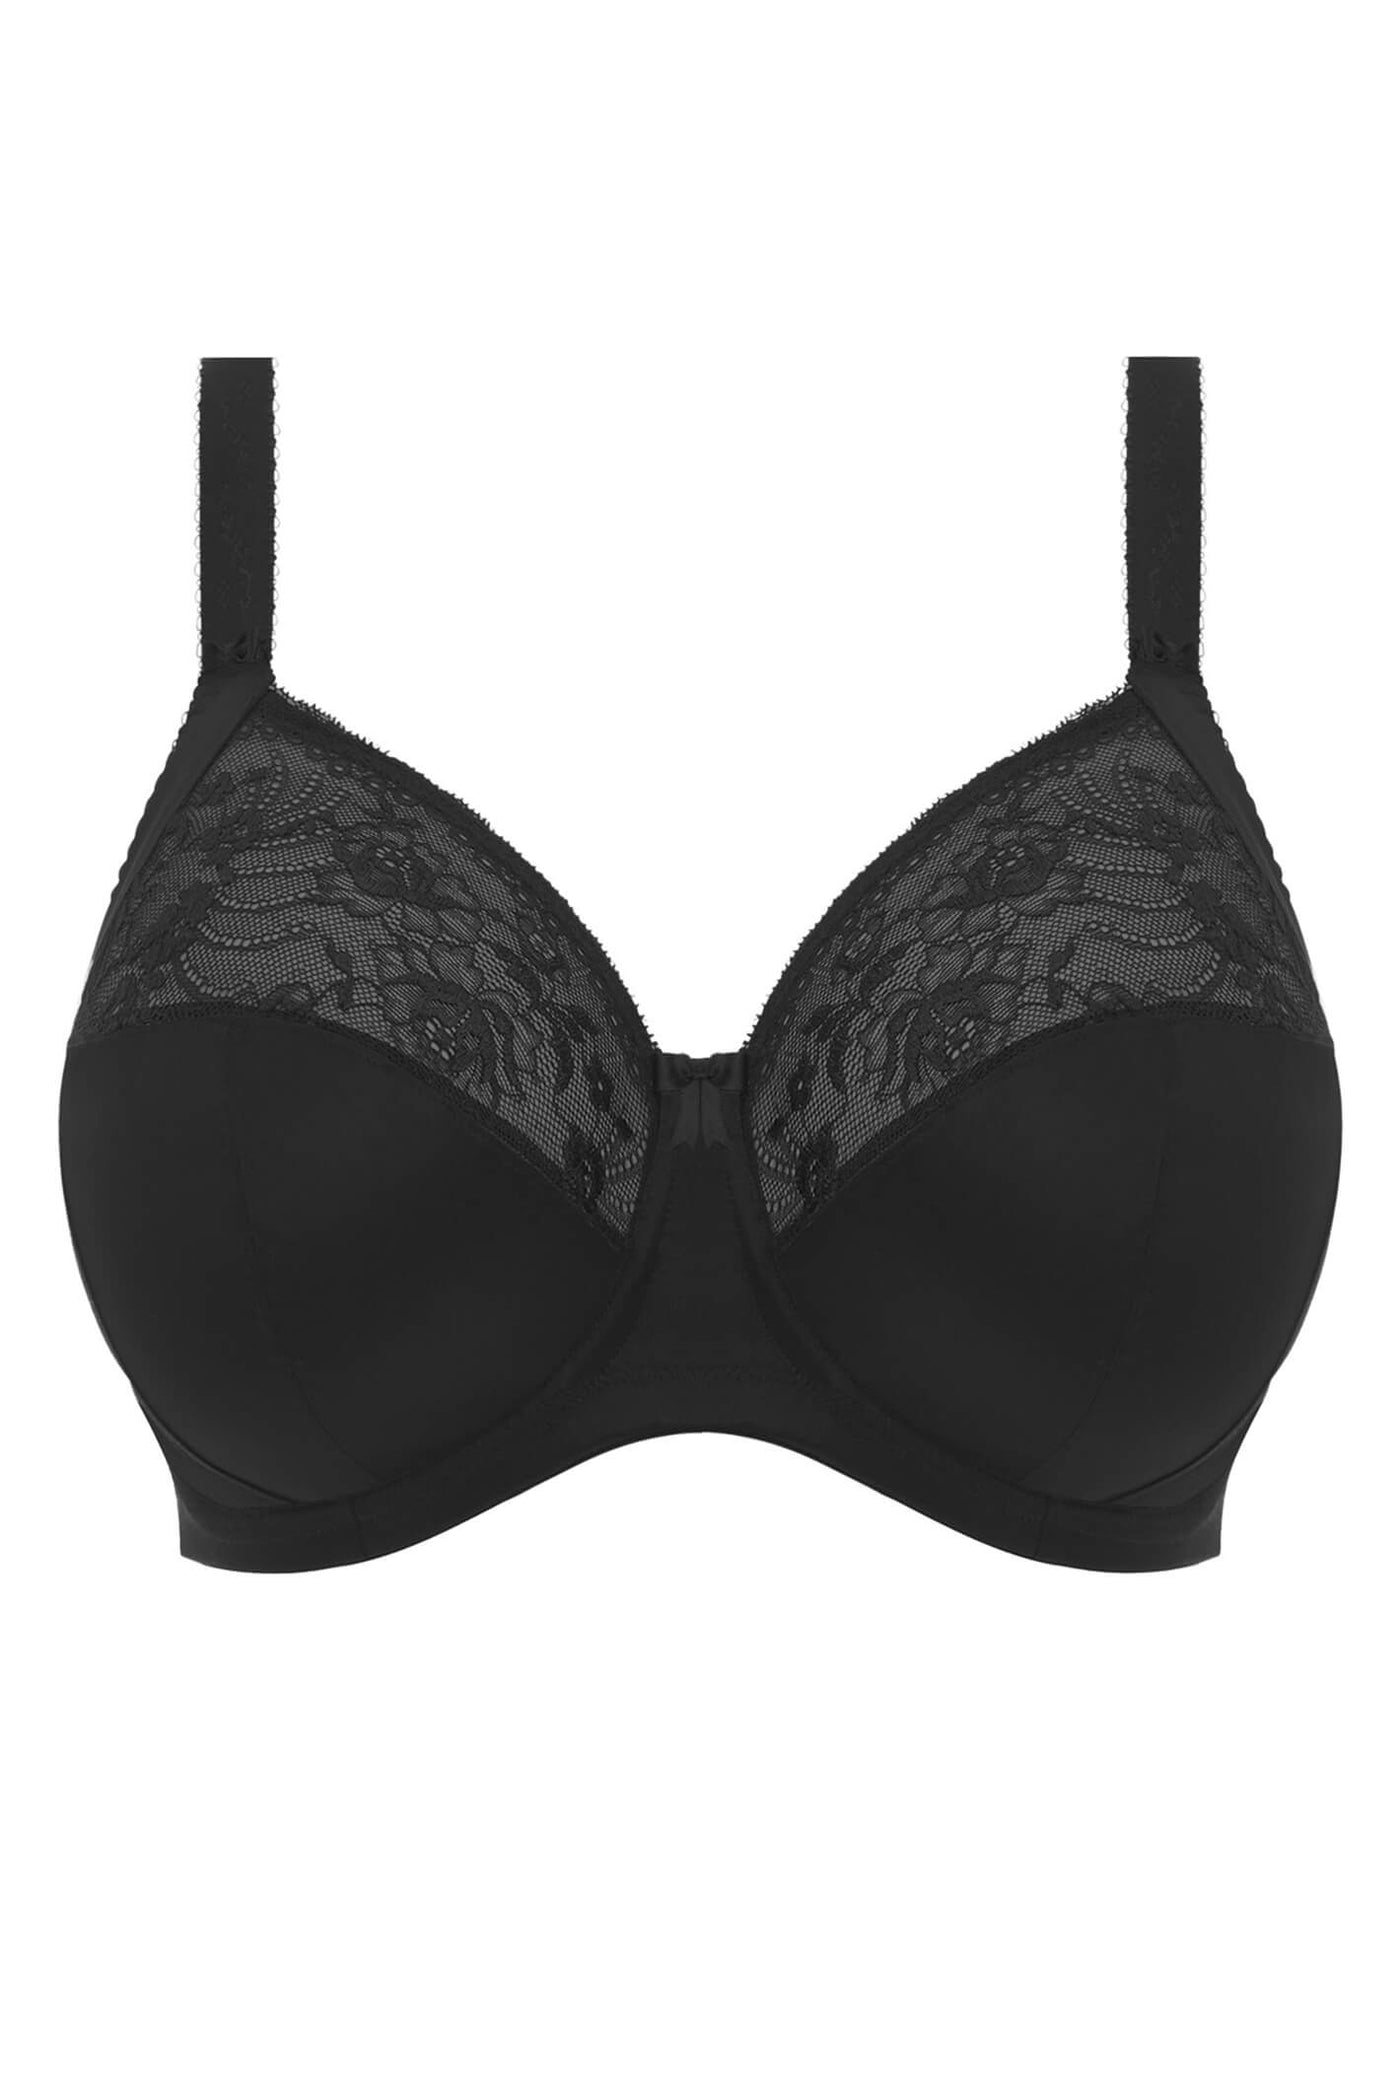 Elomi EL4111BLK Morgan Black Stretch Banded Underwired Full Cup Bra - Rouge Boutique Inverness